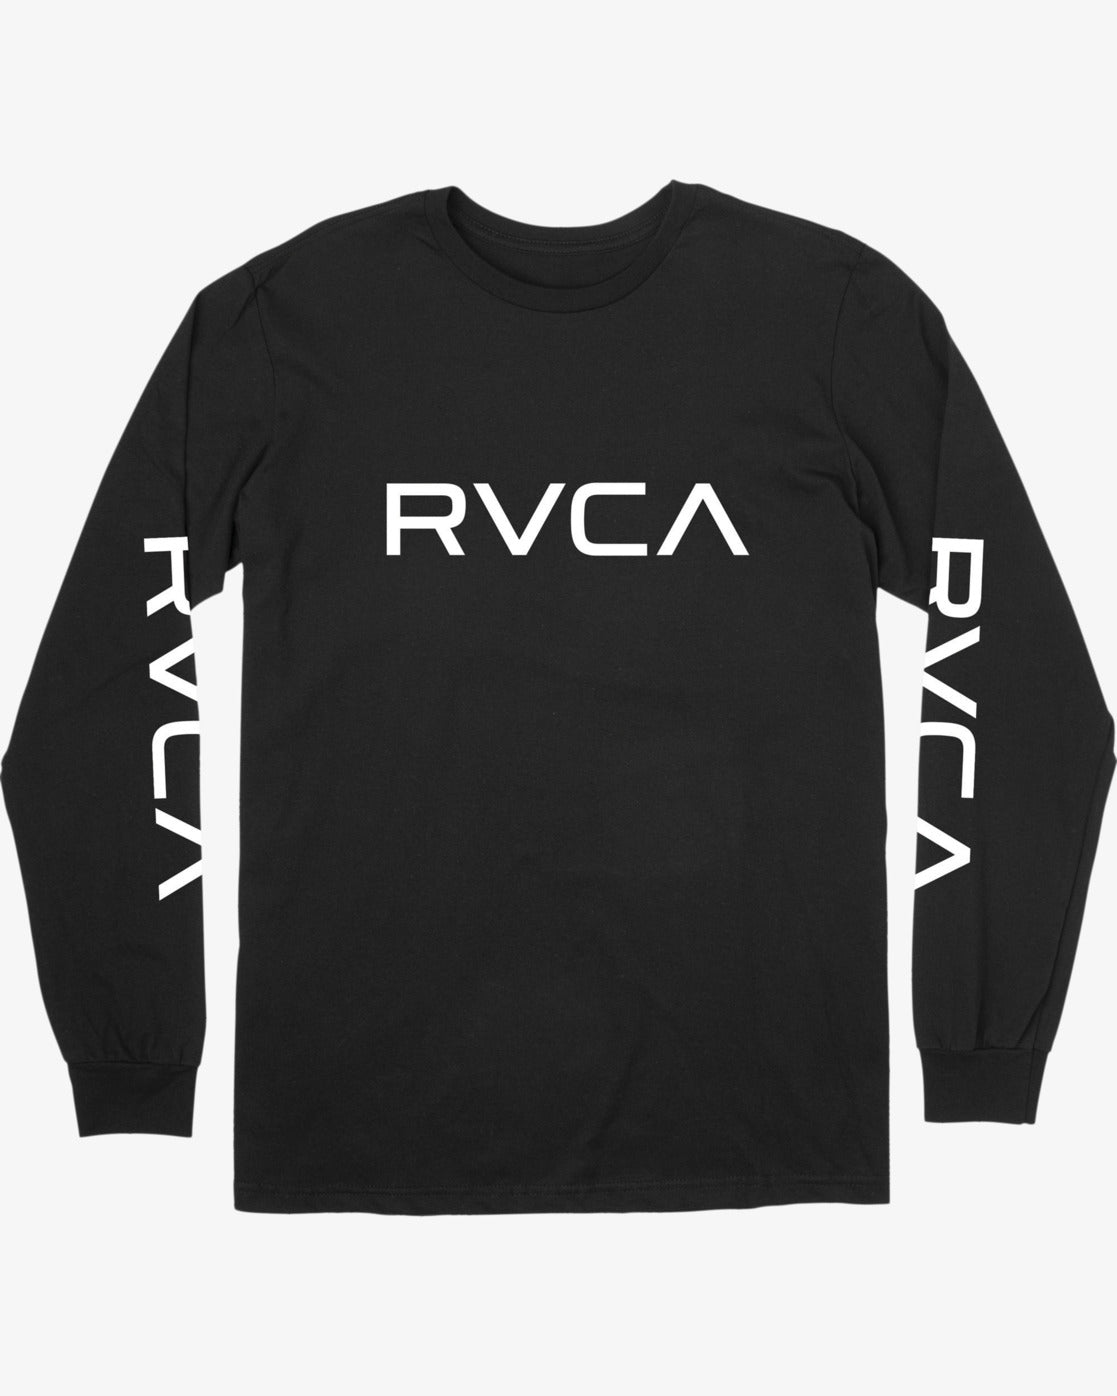  RVCA Men's Graphic Long Sleeve Crew Neck Tee Shirt, Big  L/S/Athletic, Medium : Clothing, Shoes & Jewelry